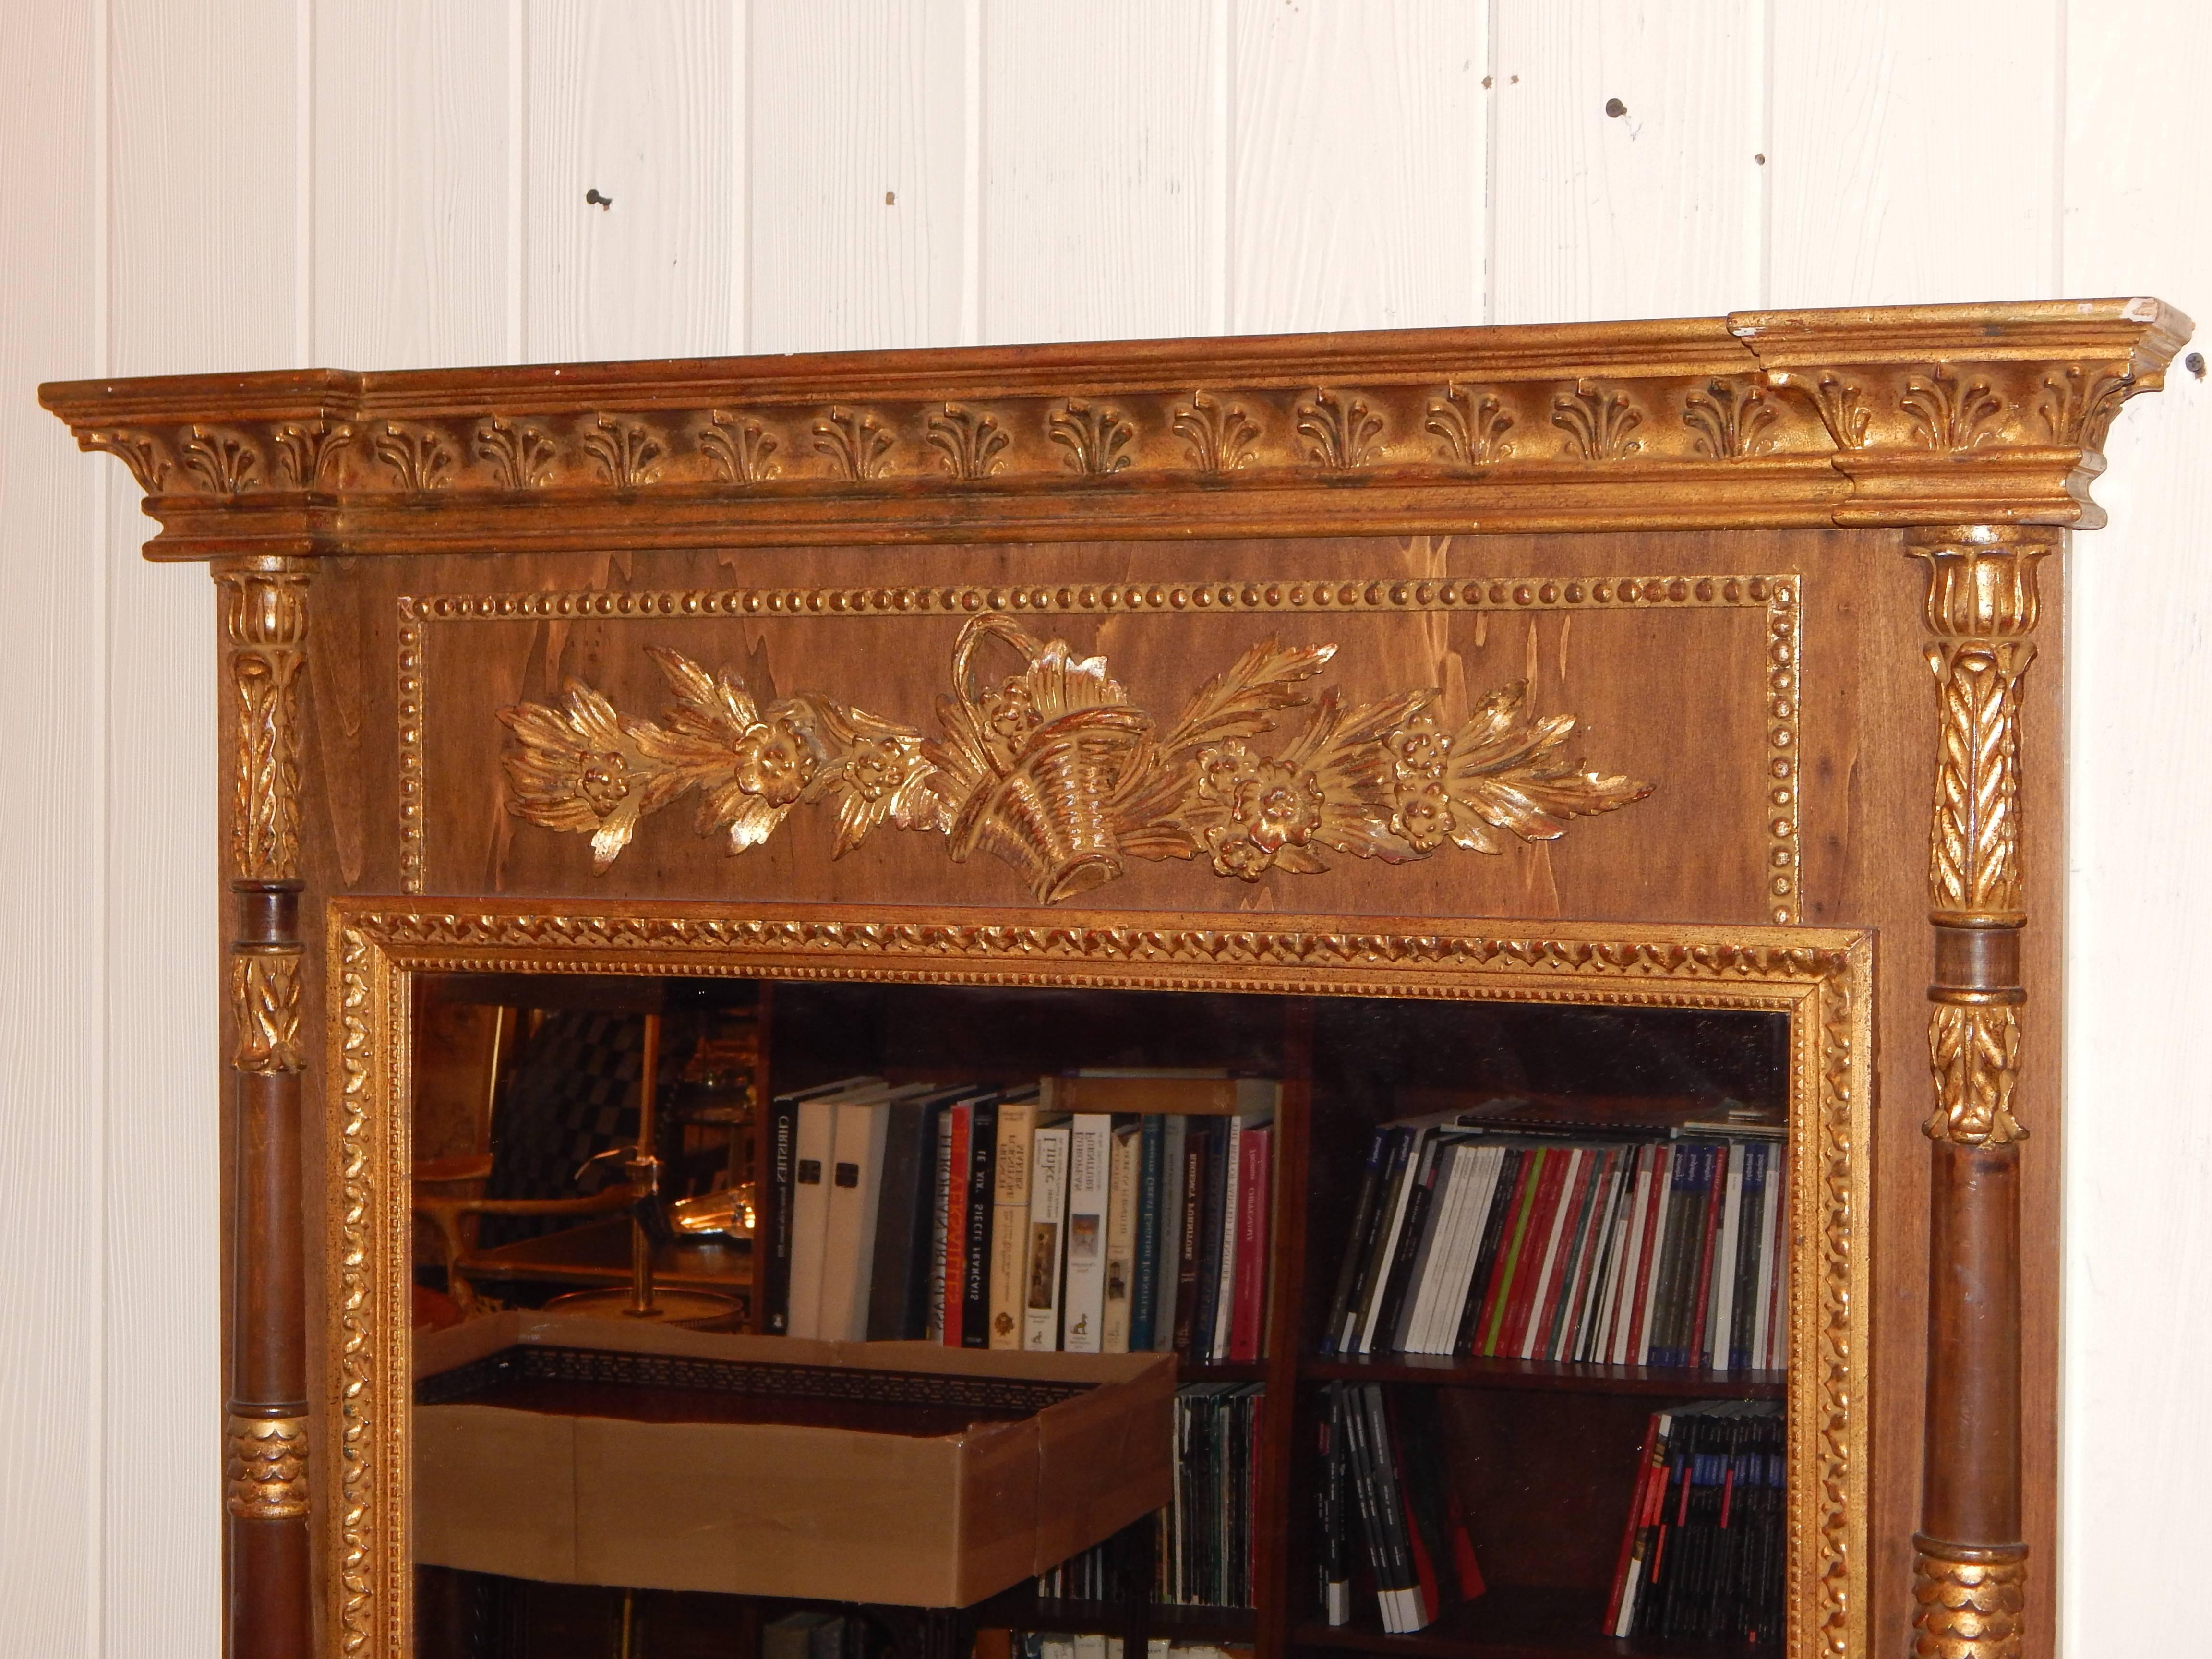 A handsome neoclassic style parcel gilt mirror with columns, and
carved flower basket.